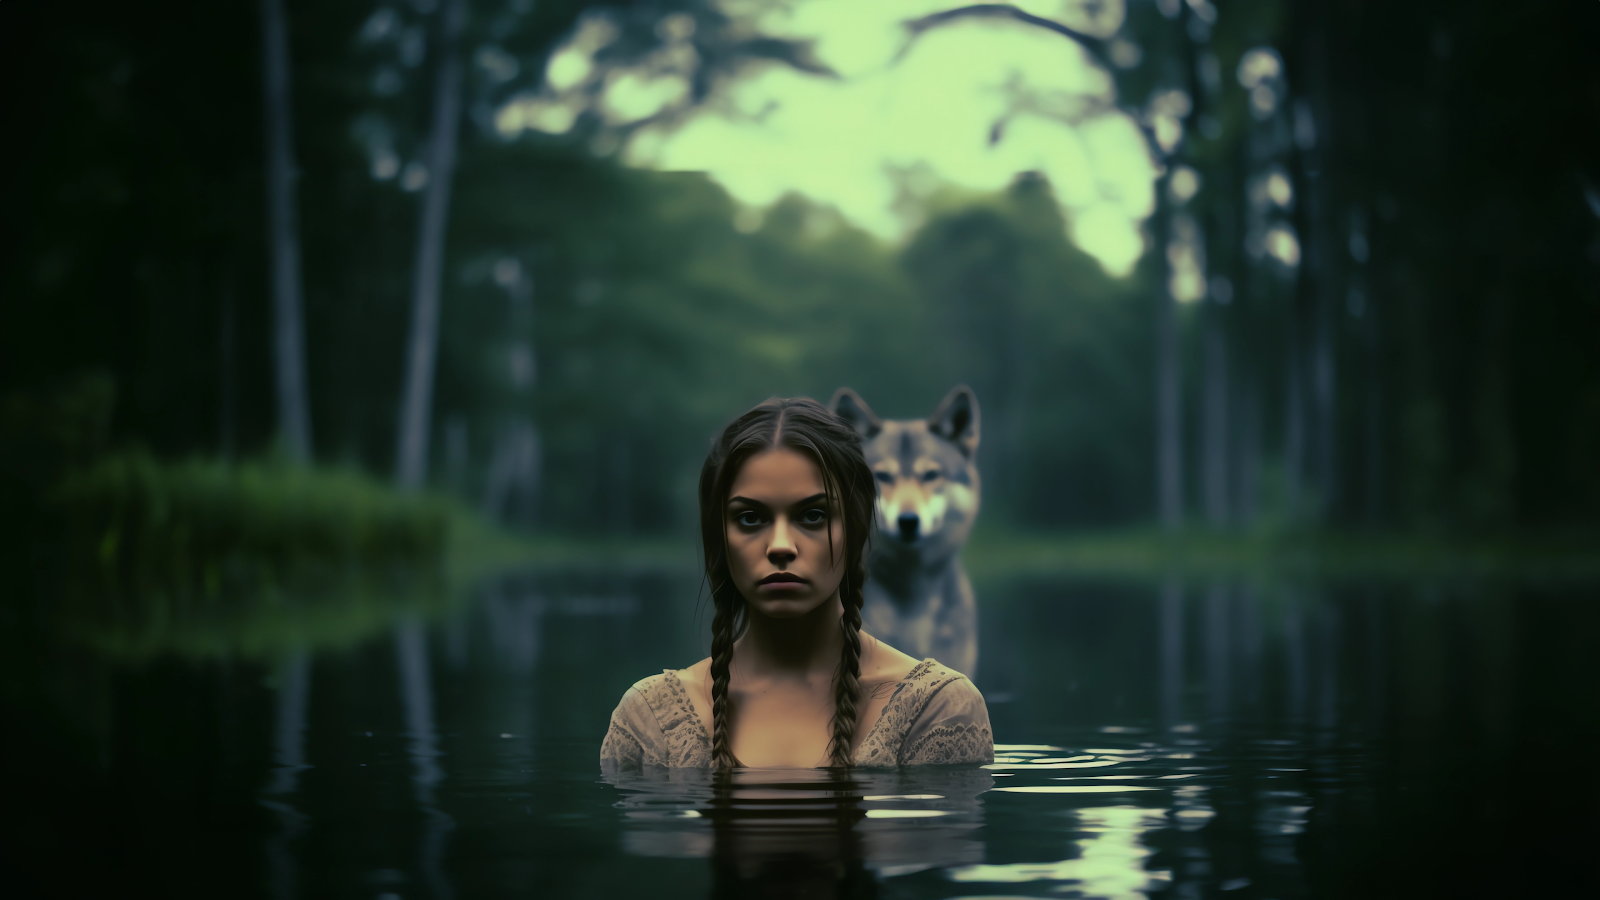 The Wild Life: 4K PC Wallpaper with Girl and Wolf in Dark Forest